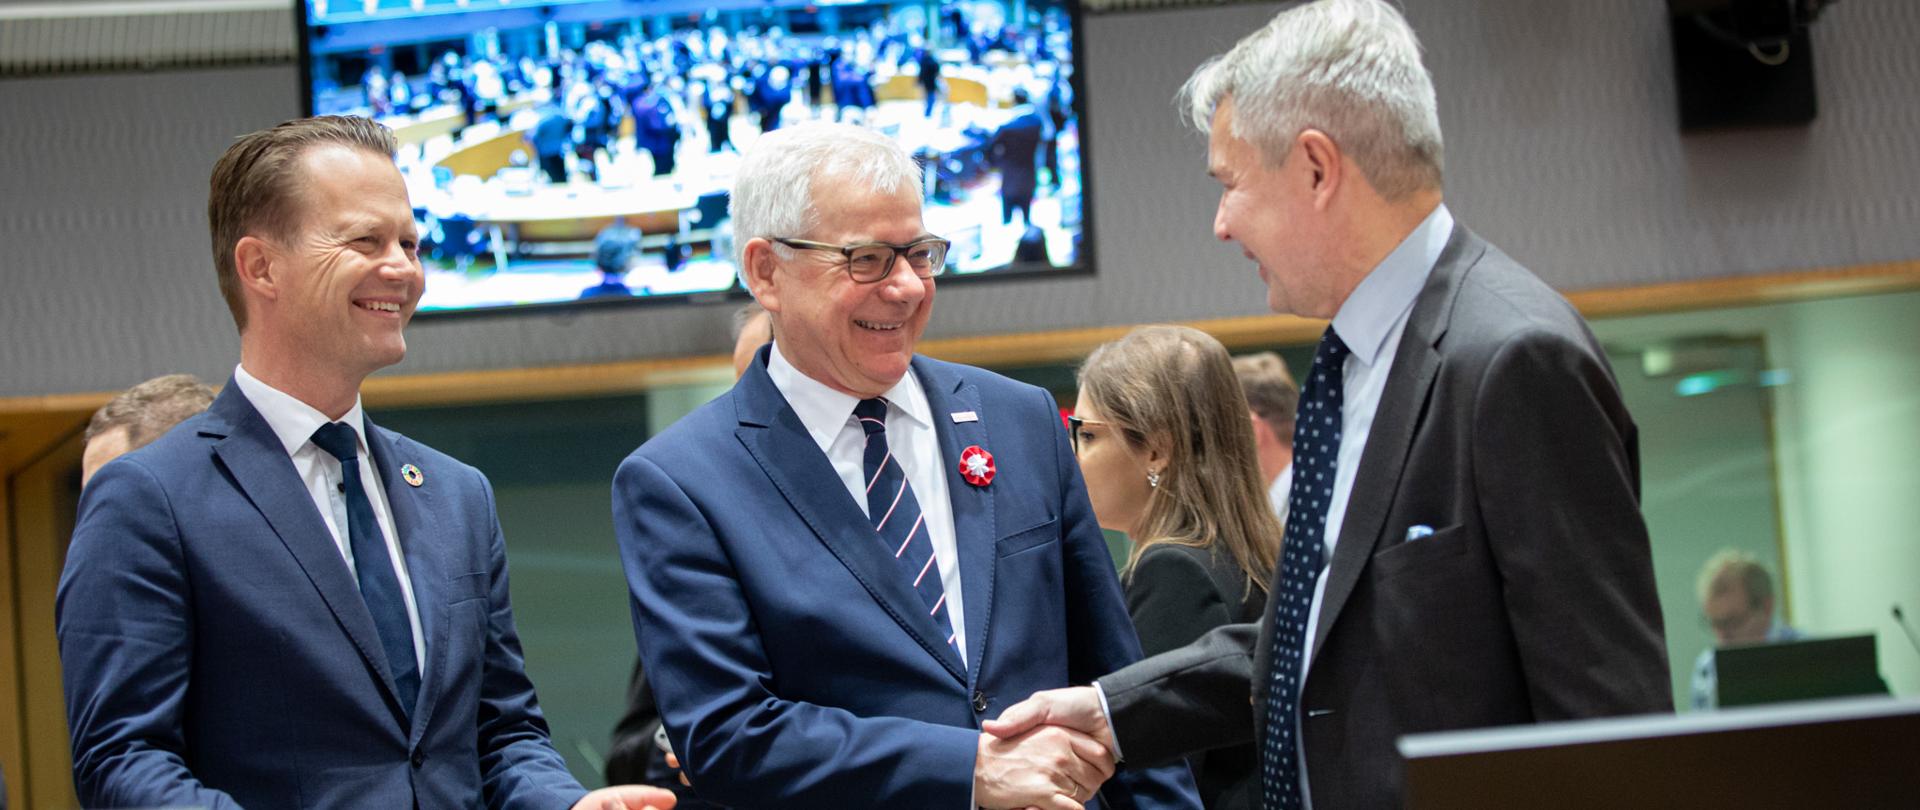 Minister Jacek Czaputowicz attends Foreign Affairs Council in Brussels